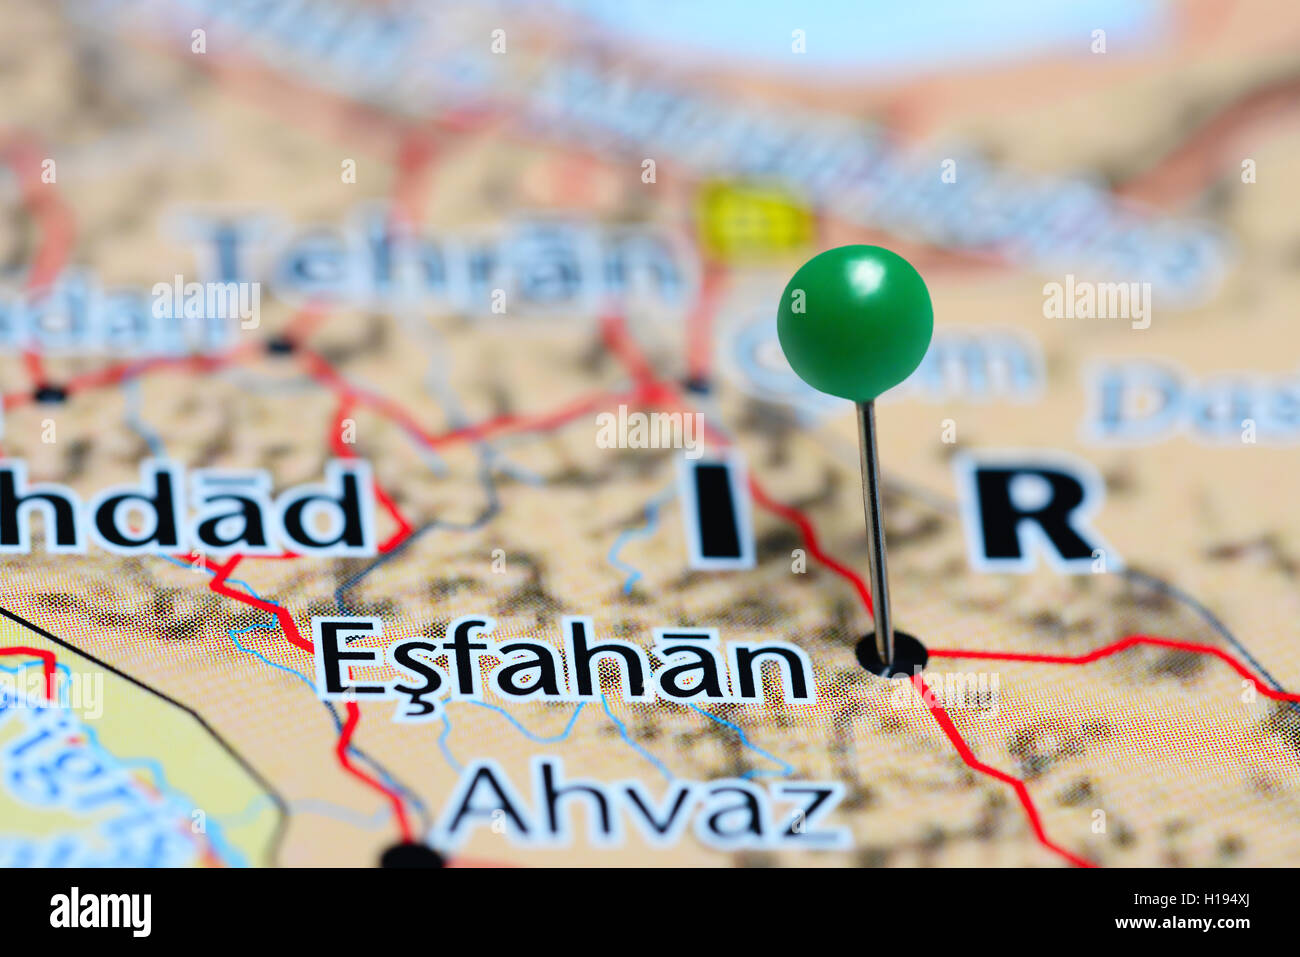 Esfahan pinned on a map of Iran Stock Photo